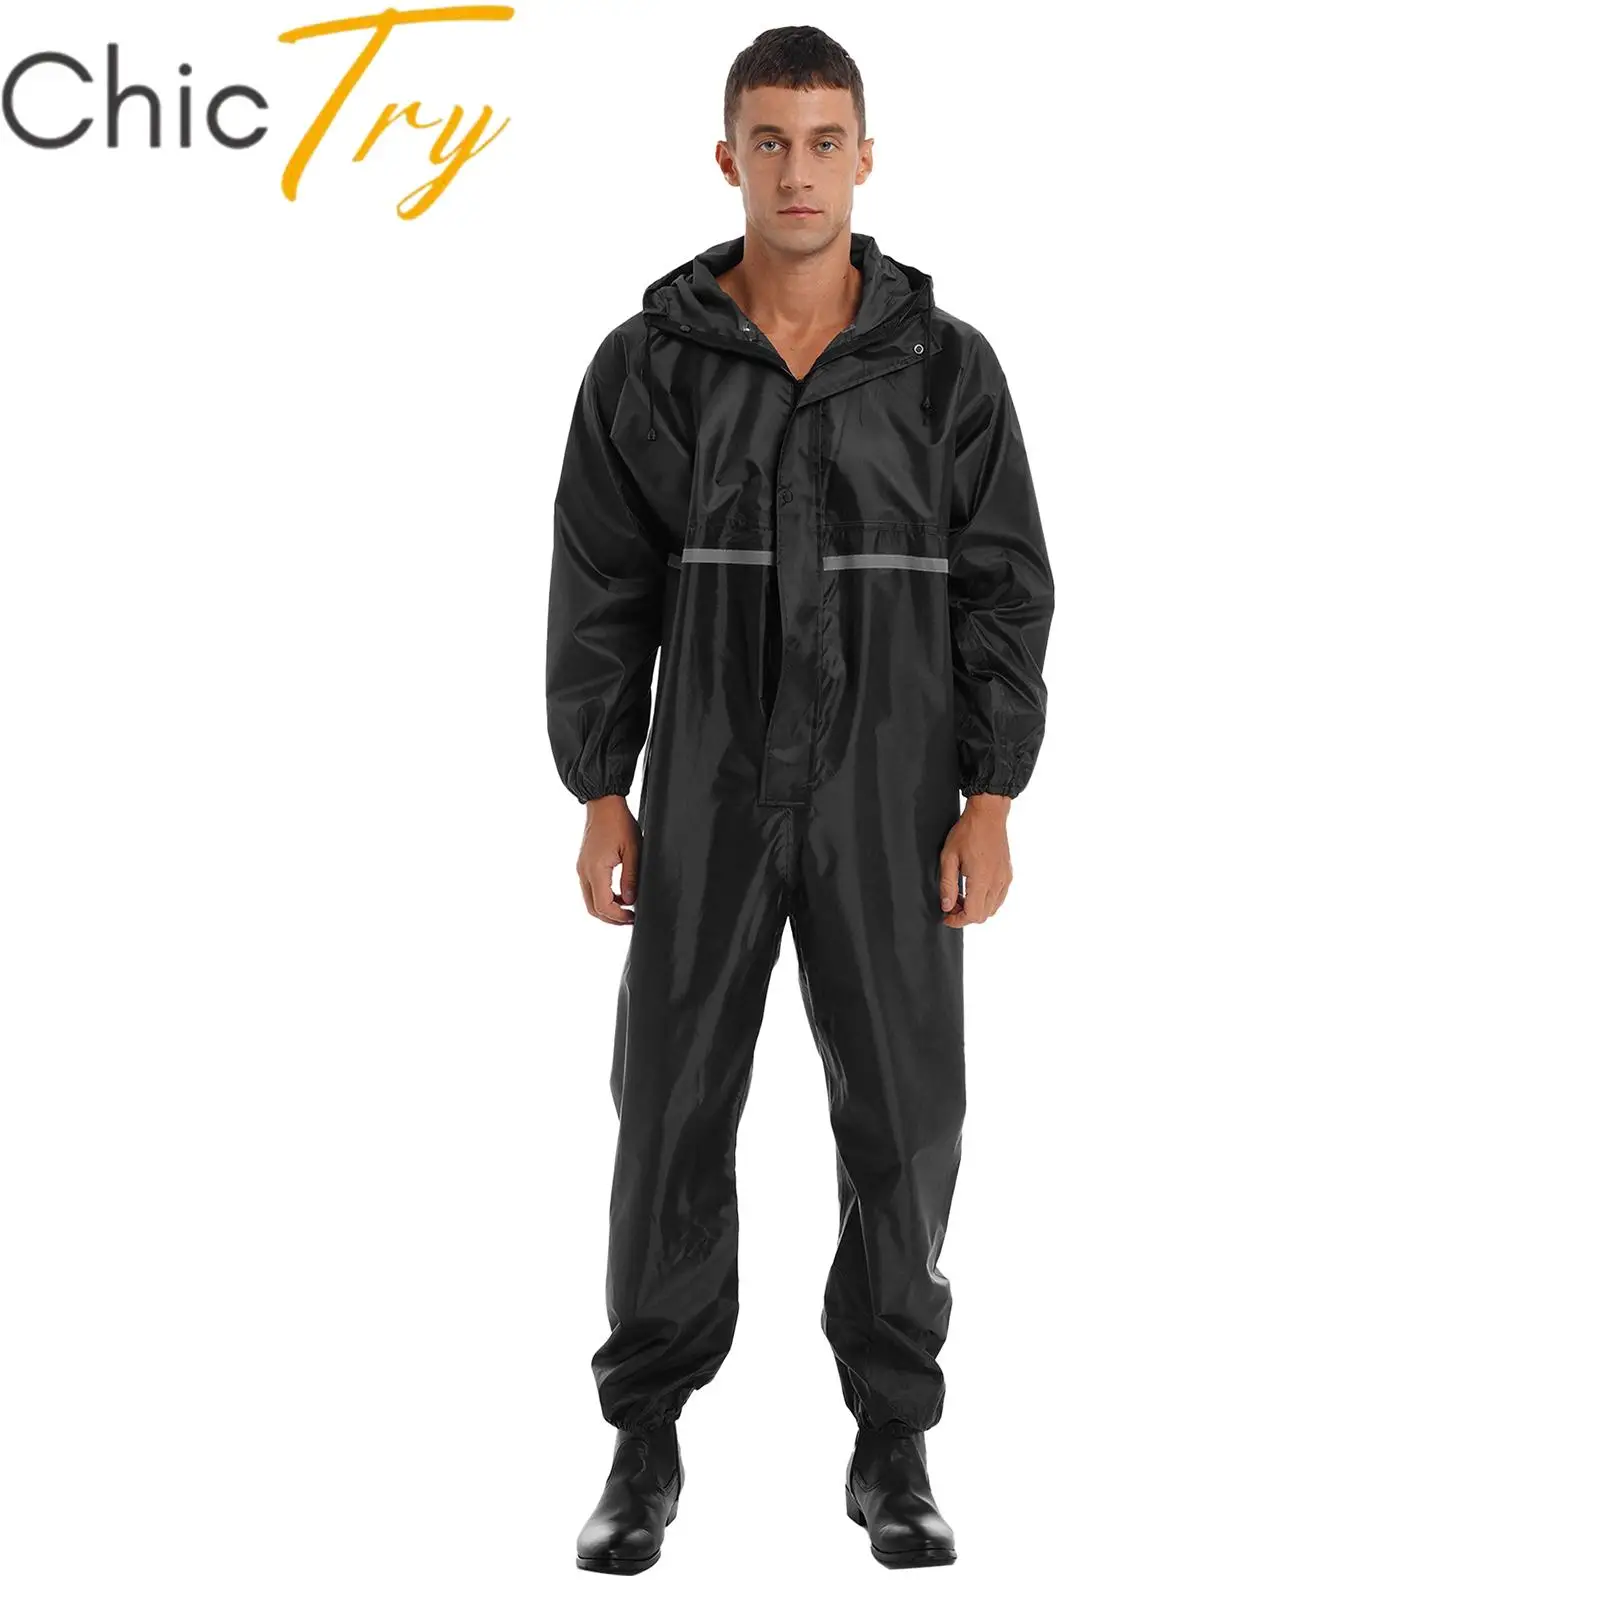 

Mens Waterproof Jumpsuit Reflective Strip Rainsuit Long Sleeve Hooded Raincoat Zipper Coveralls Romper for Sports Camping Hiking